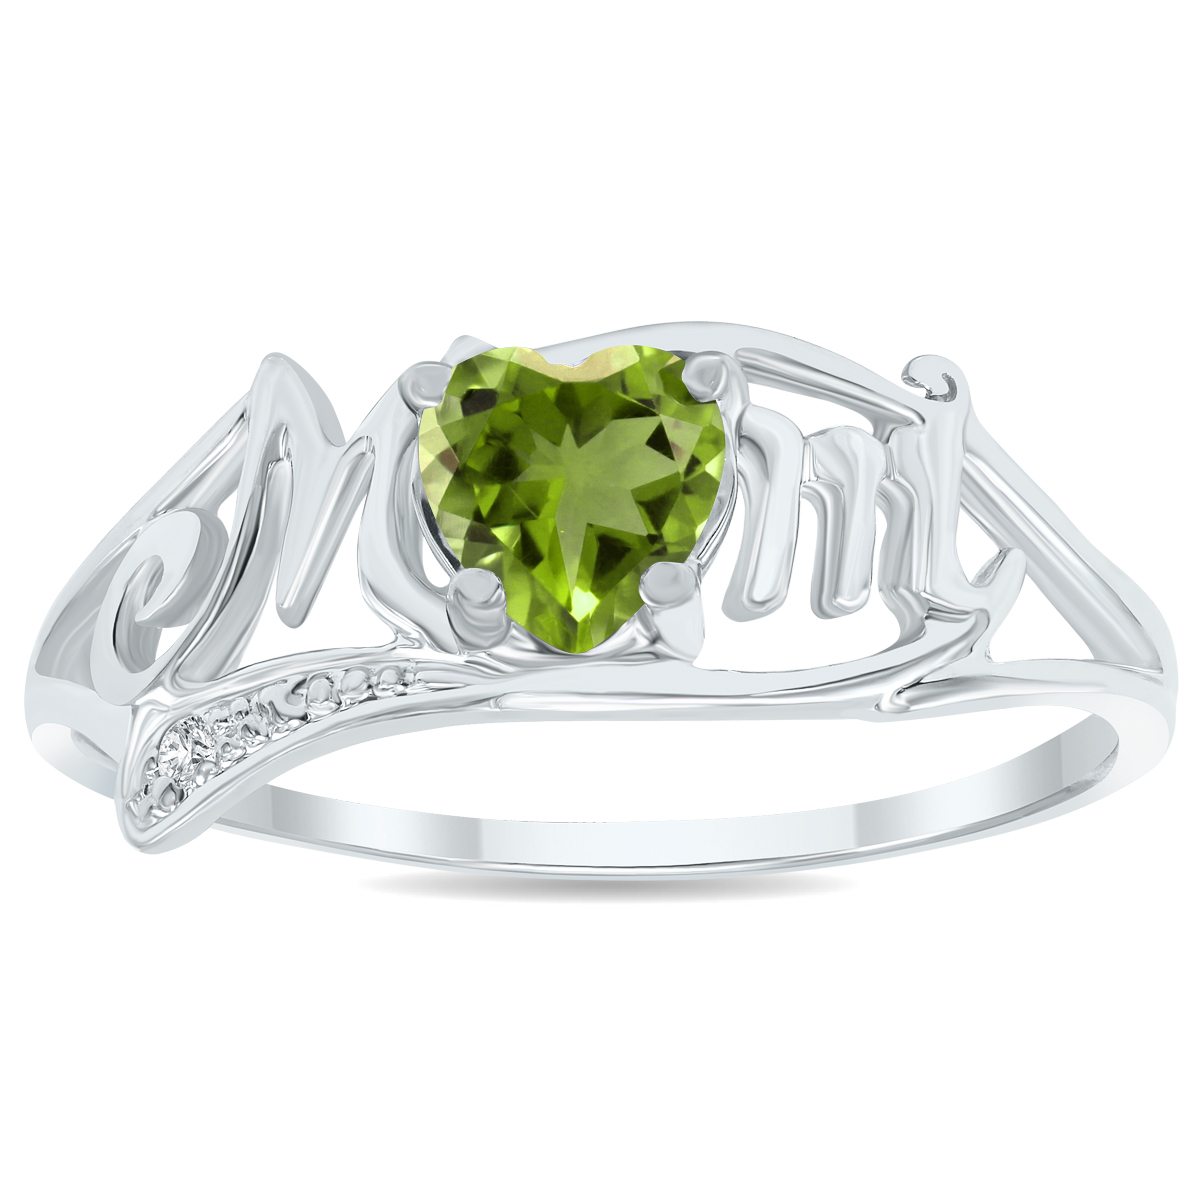 Peridot and Diamond Heart Shaped MOM Ring in 10K White Gold